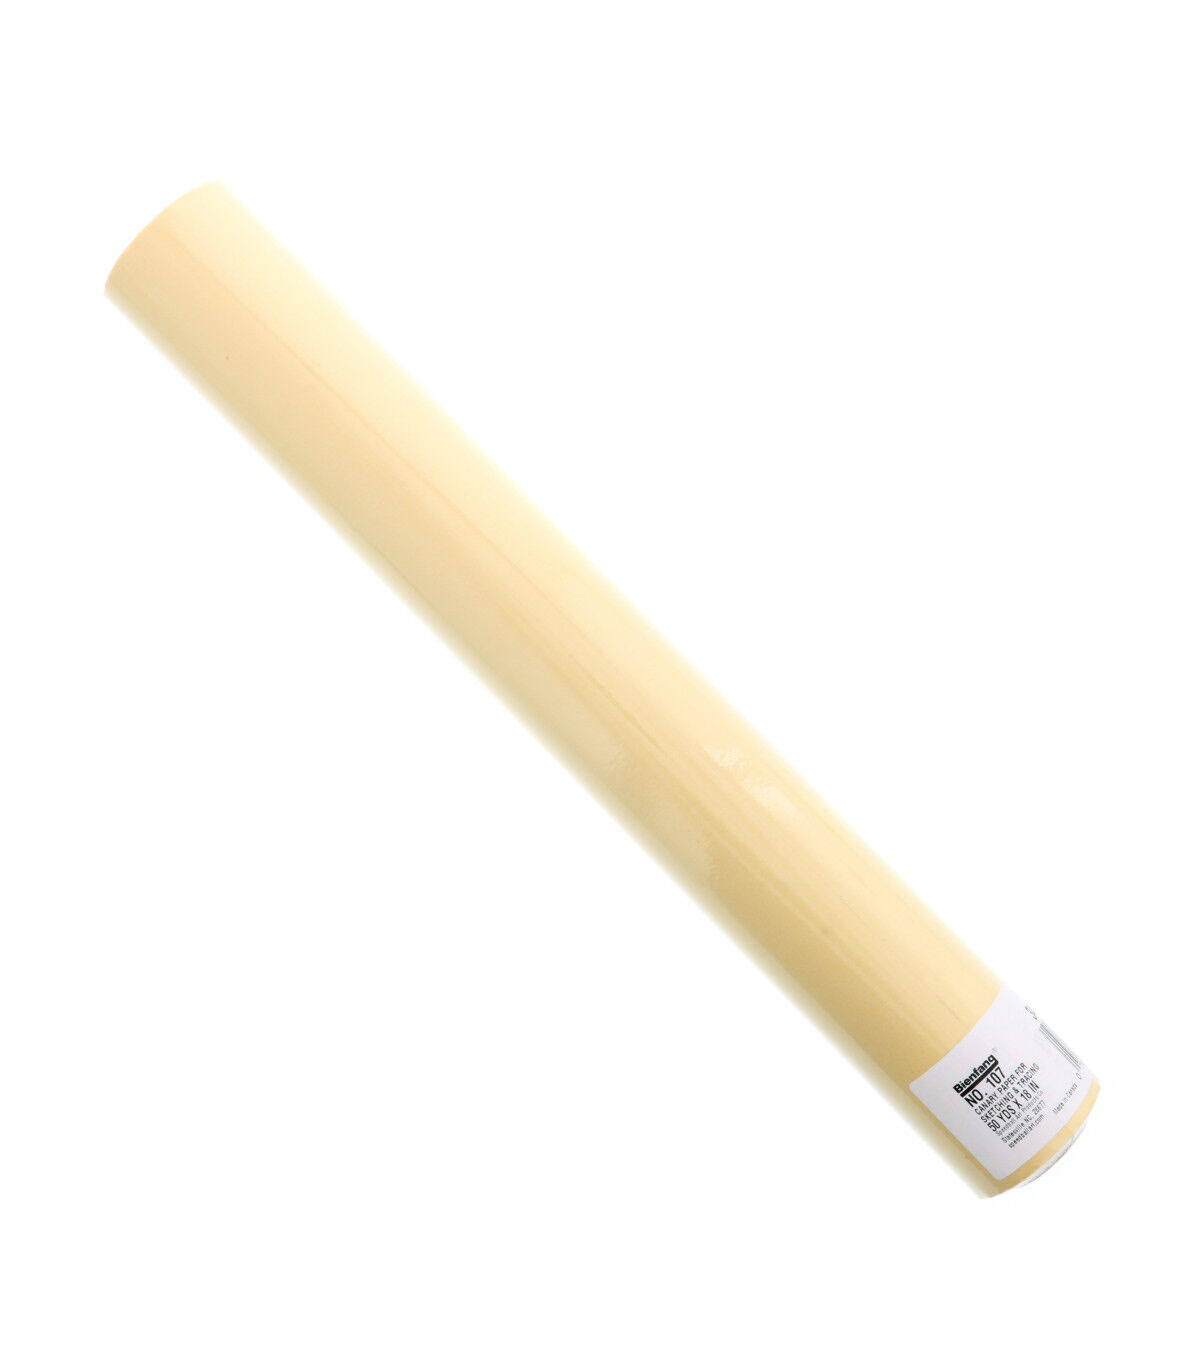 Bienfang Sketching Paper Roll, 18 Inches Width, 50 Yards, Canary Yellow, Roll (341-136)